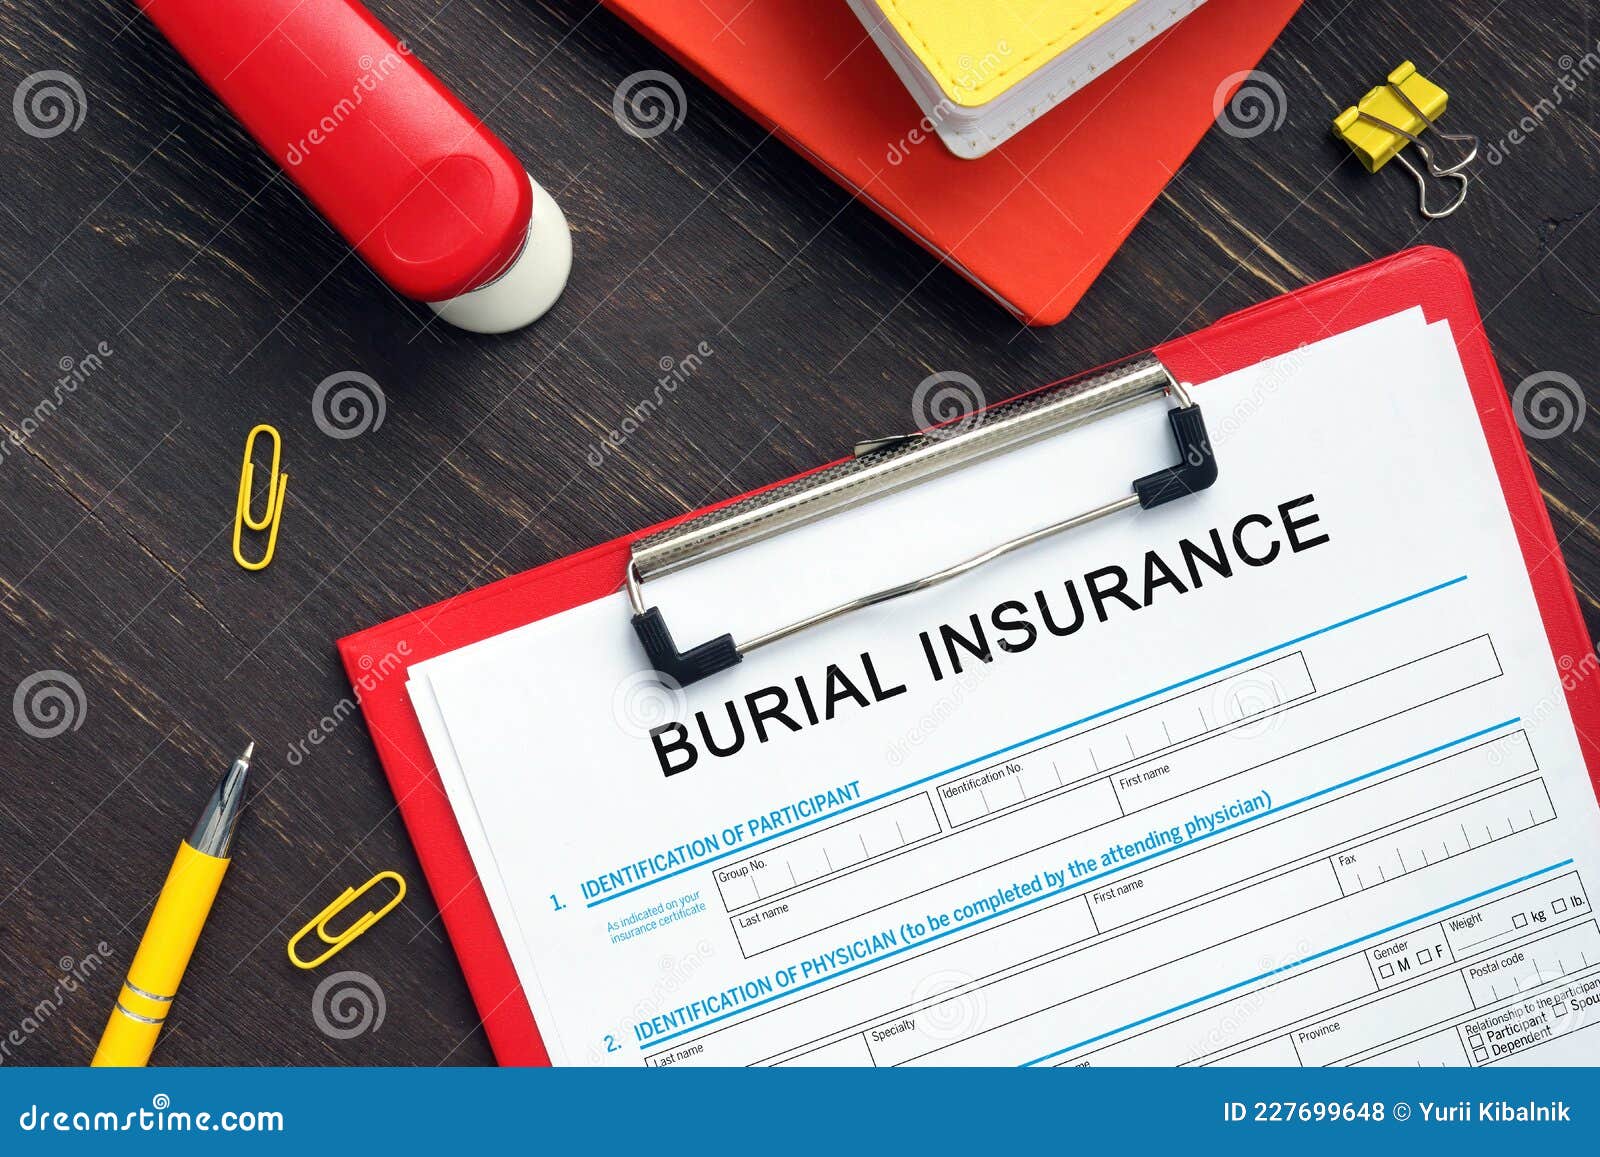 burial insurance application form sign on the financial document